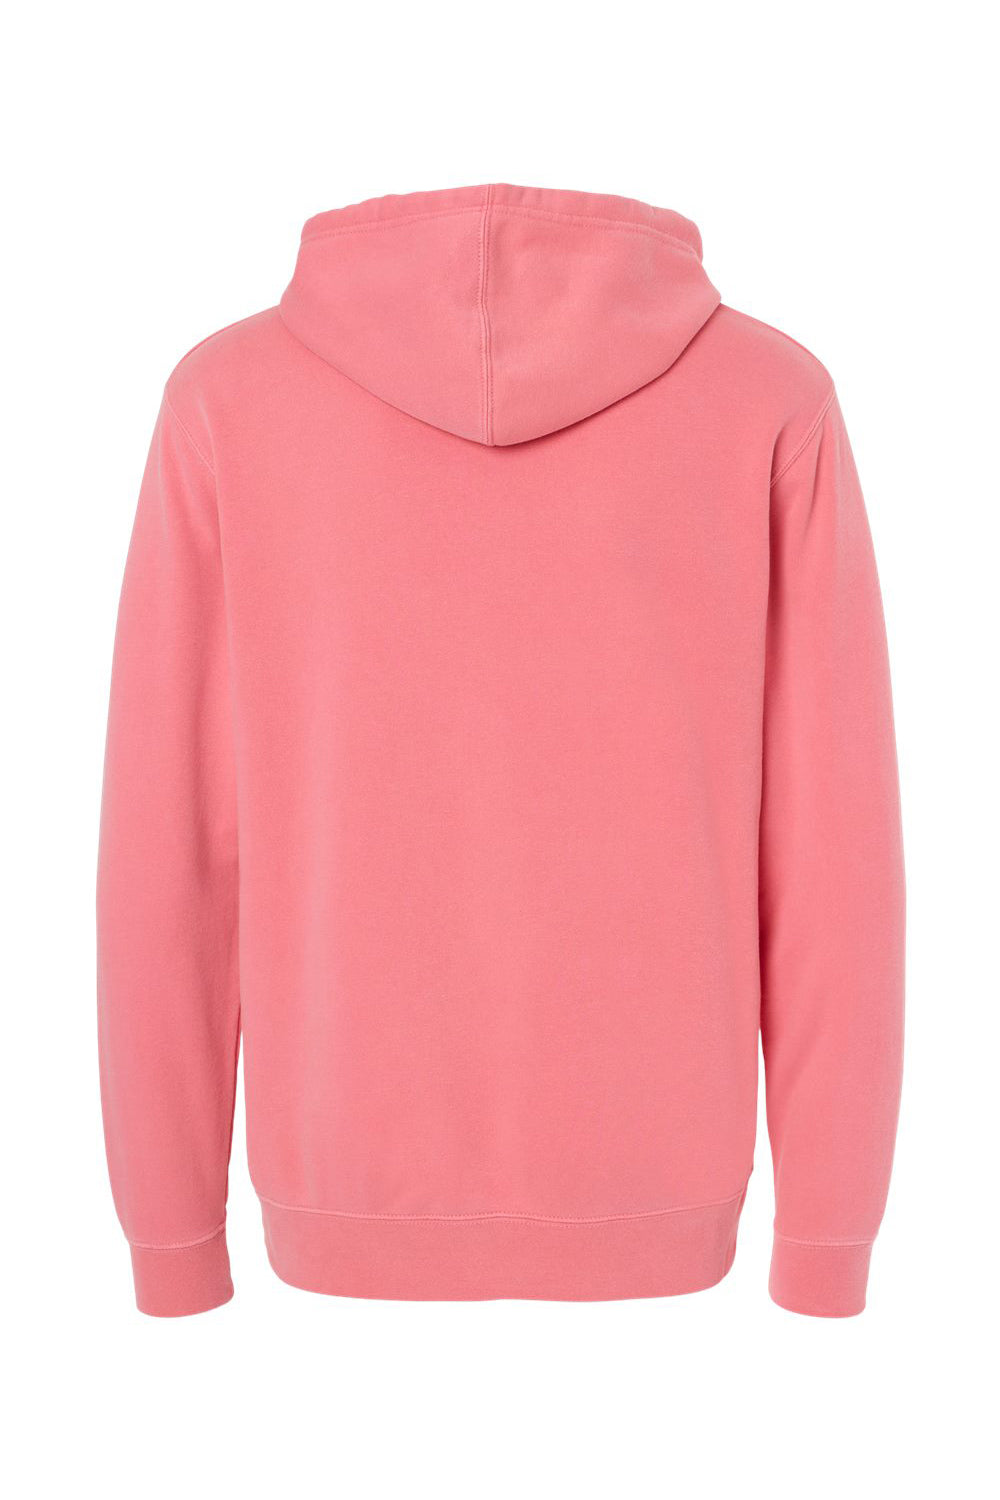 Independent Trading Co. PRM4500 Mens Pigment Dyed Hooded Sweatshirt Hoodie Pink Flat Back